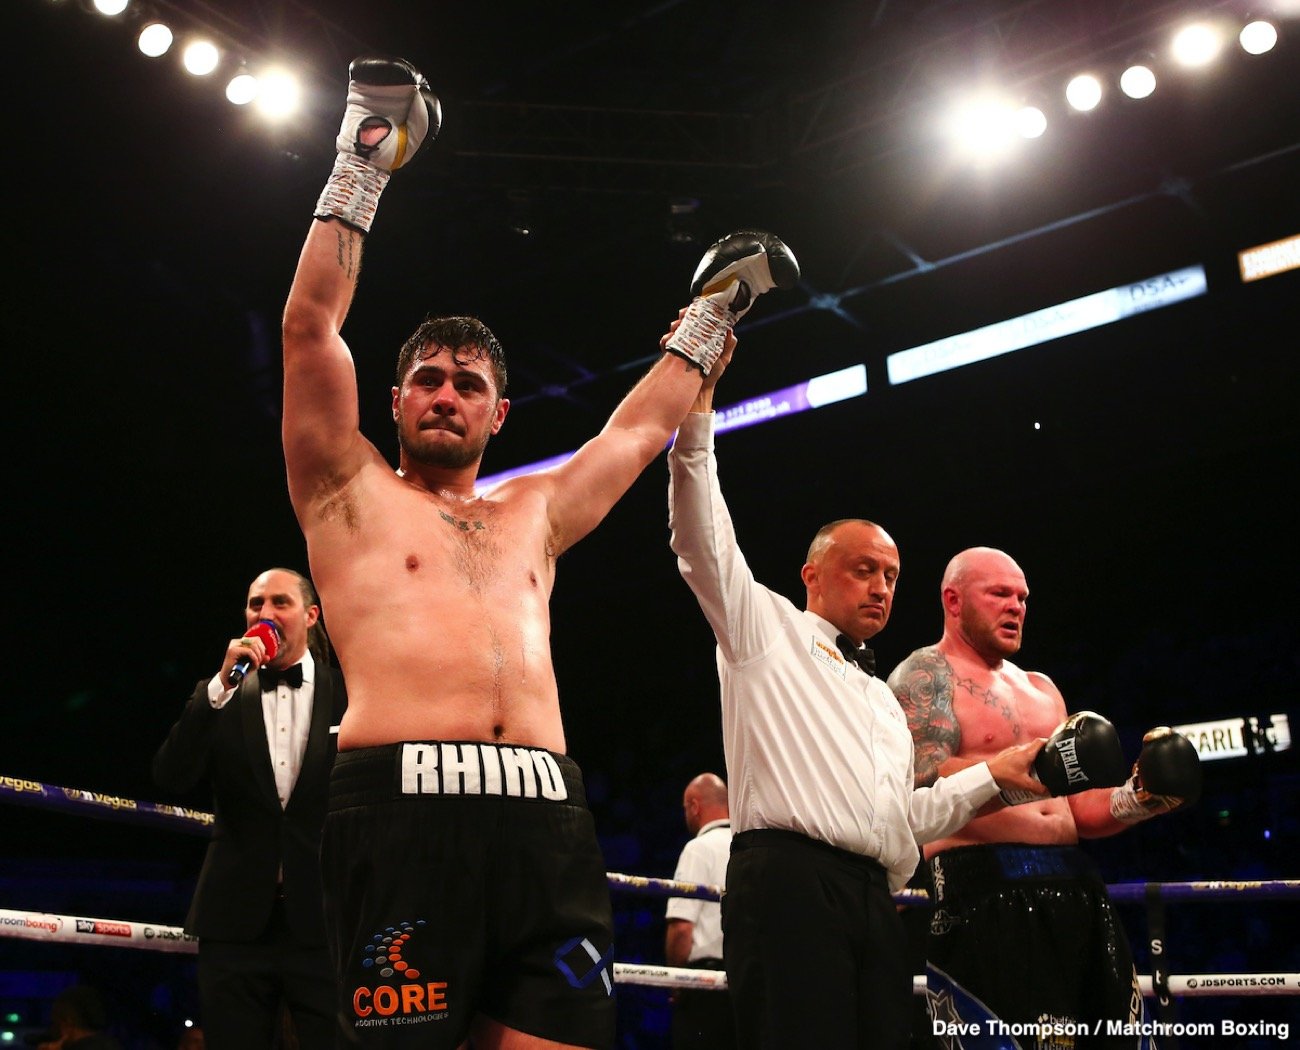 Image: Dave Allen needs new opponent, Christian Hammer tests for COVID 19